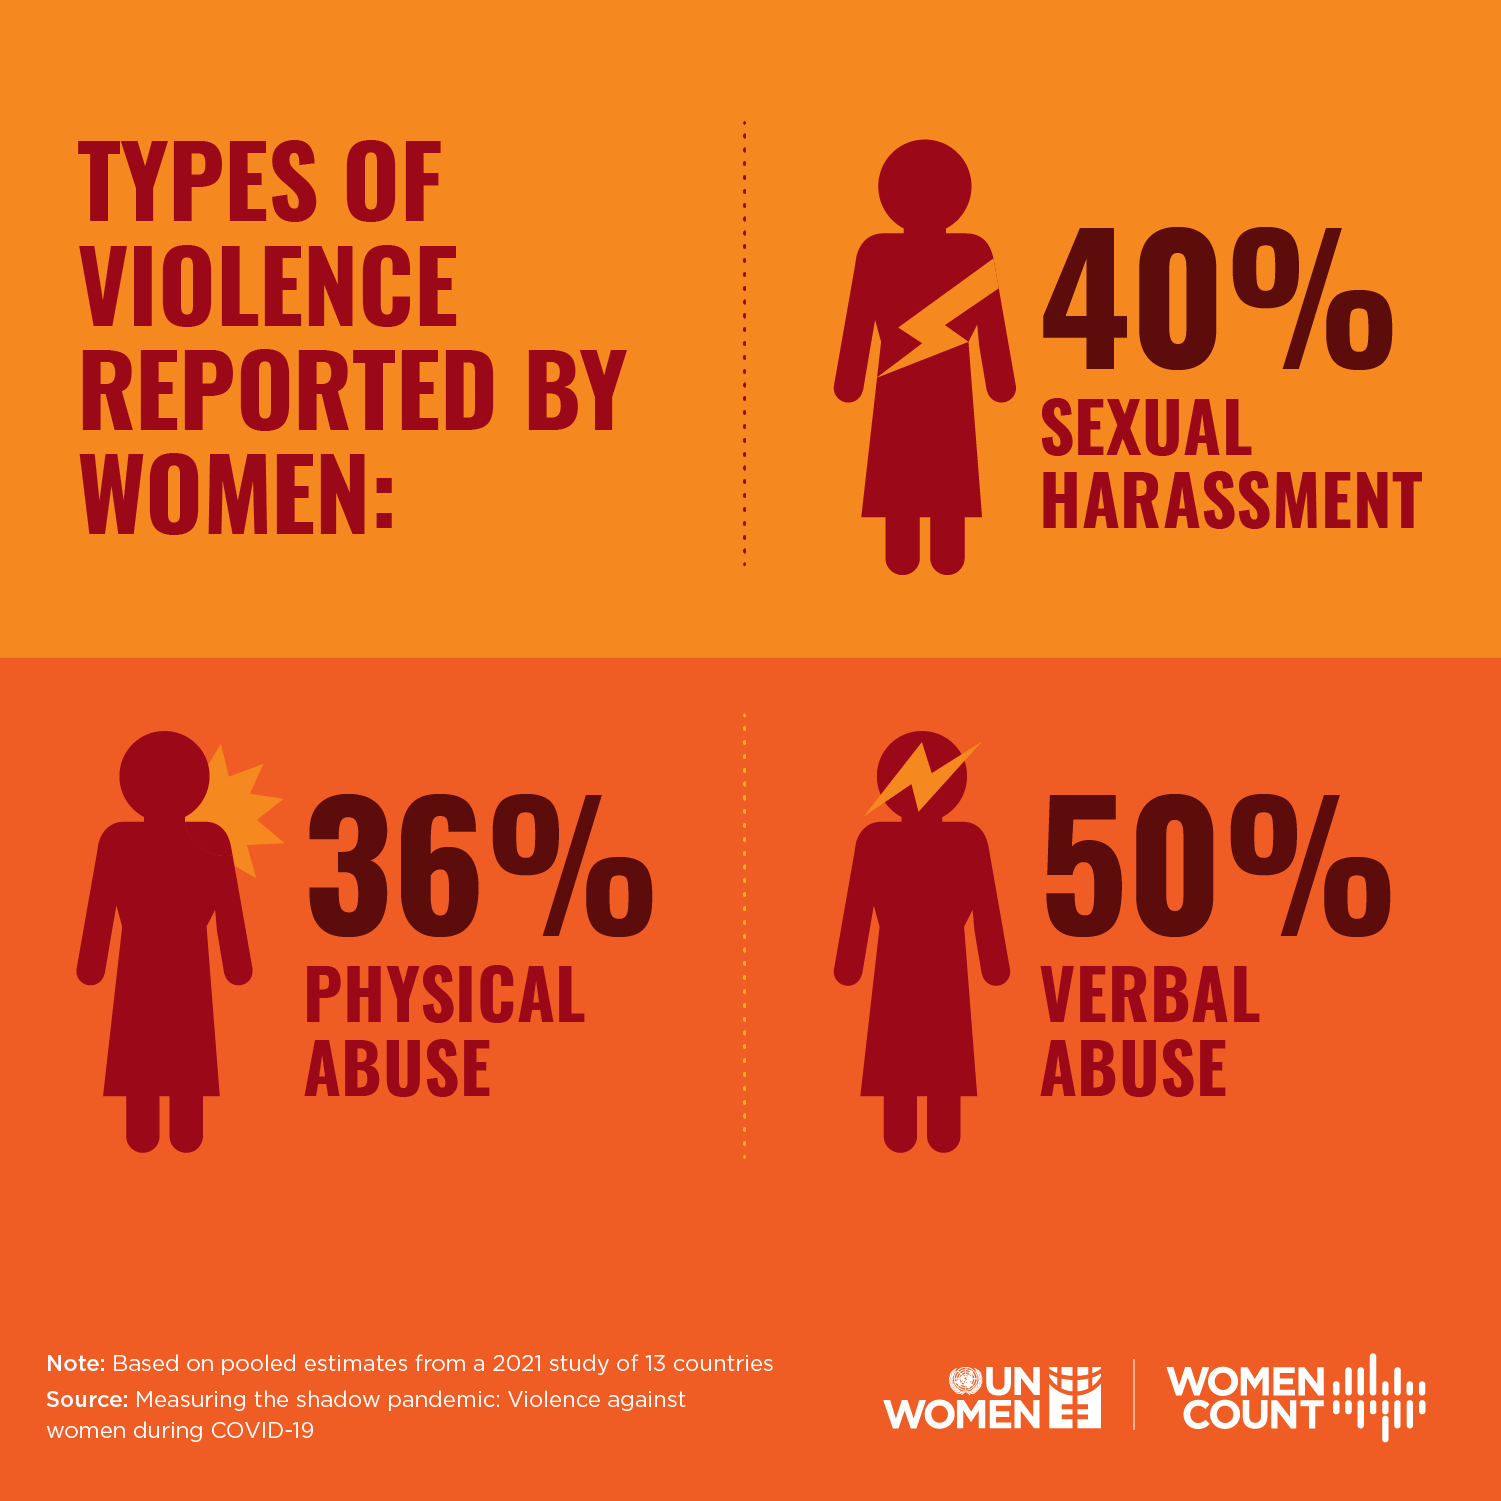 Types of violence reported by women